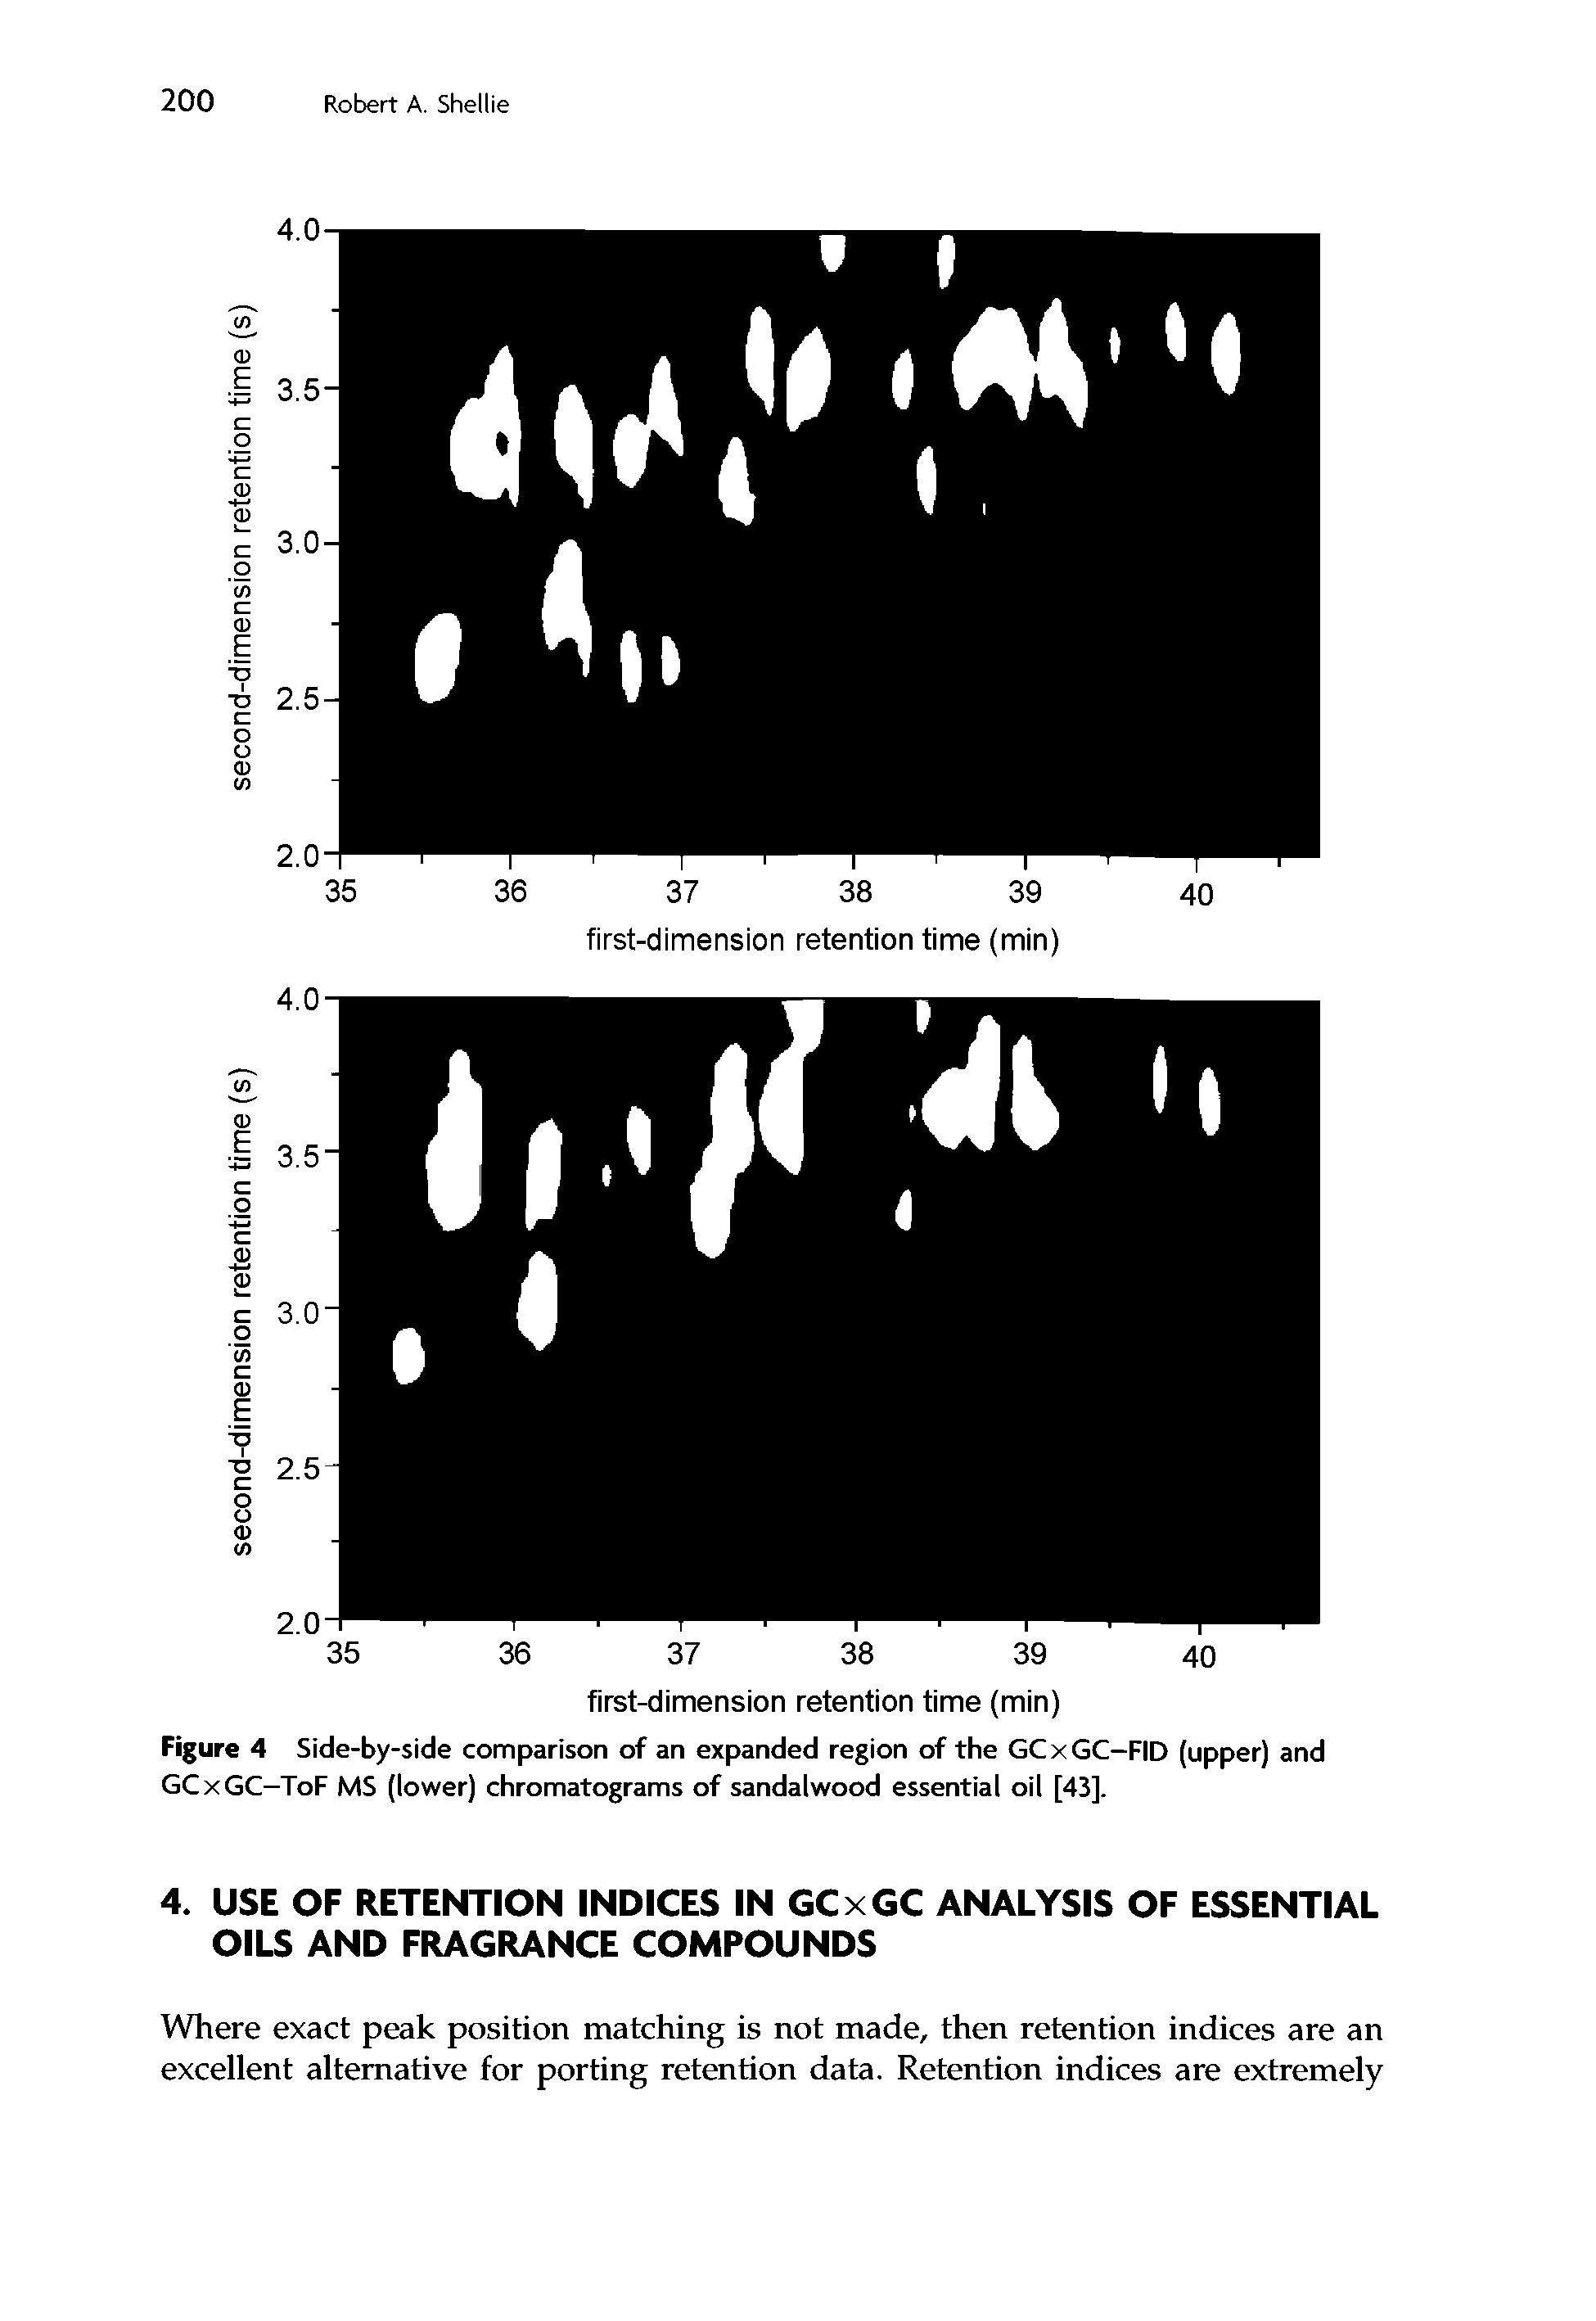 Figure 4 Side-by-side comparison of an expanded region of the GCxGC-FID (upper) and GCxGC-ToF MS (lower) chromatograms of sandalwood essential oil [43].